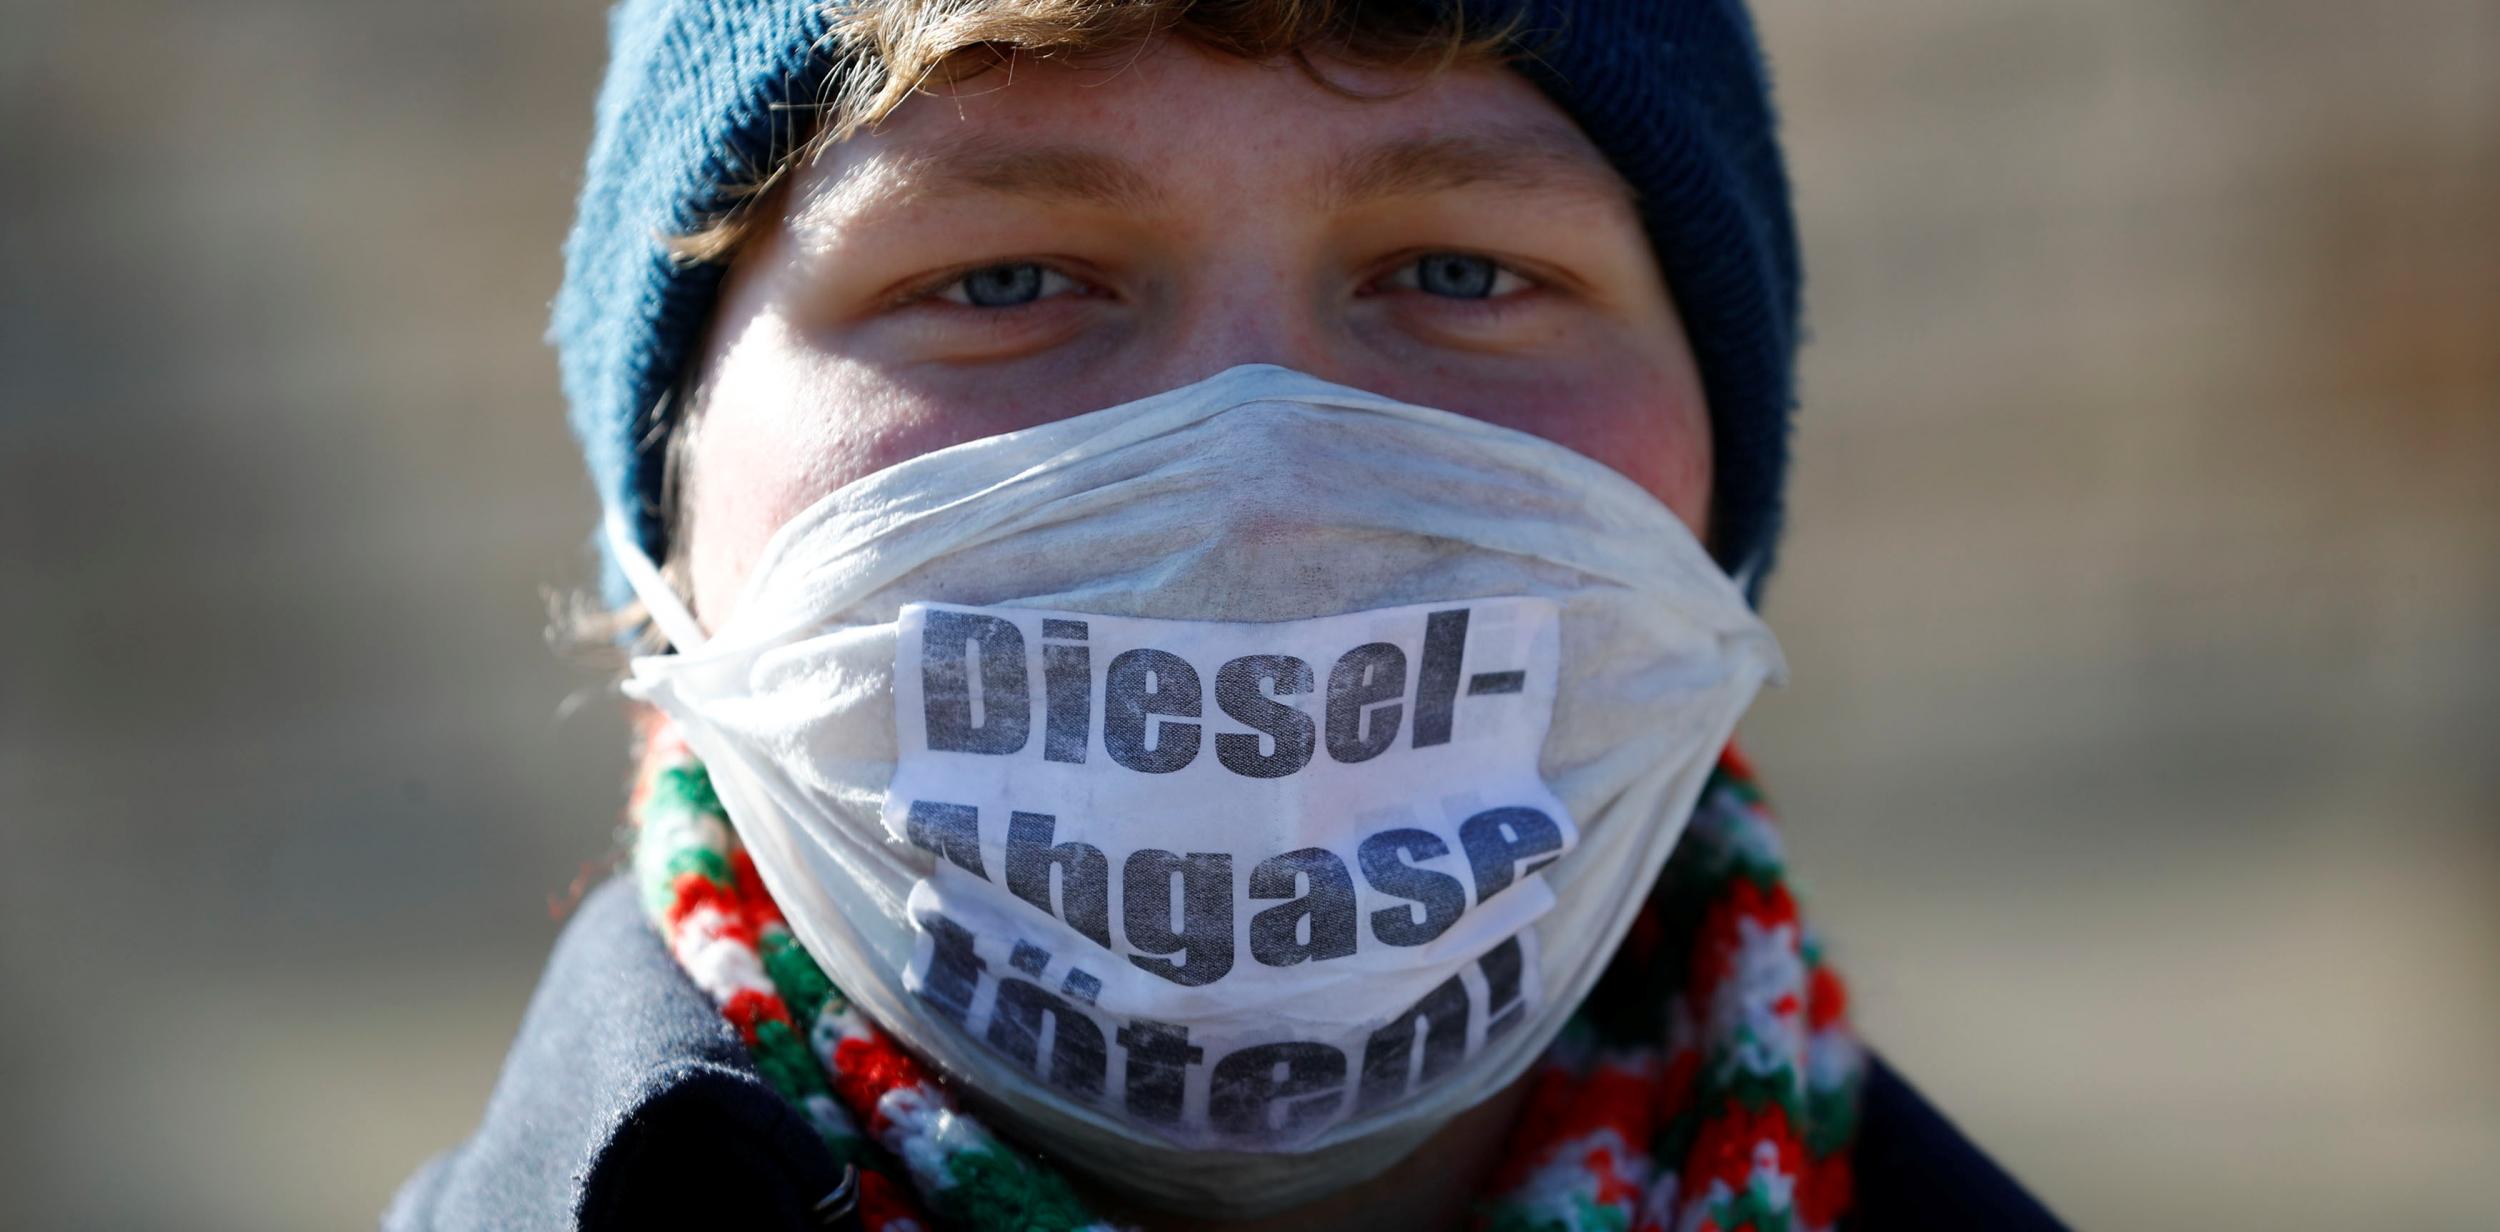 Some 6,000 people die prematurely each year in Germany because of excessive levels of harmful nitrogen oxides